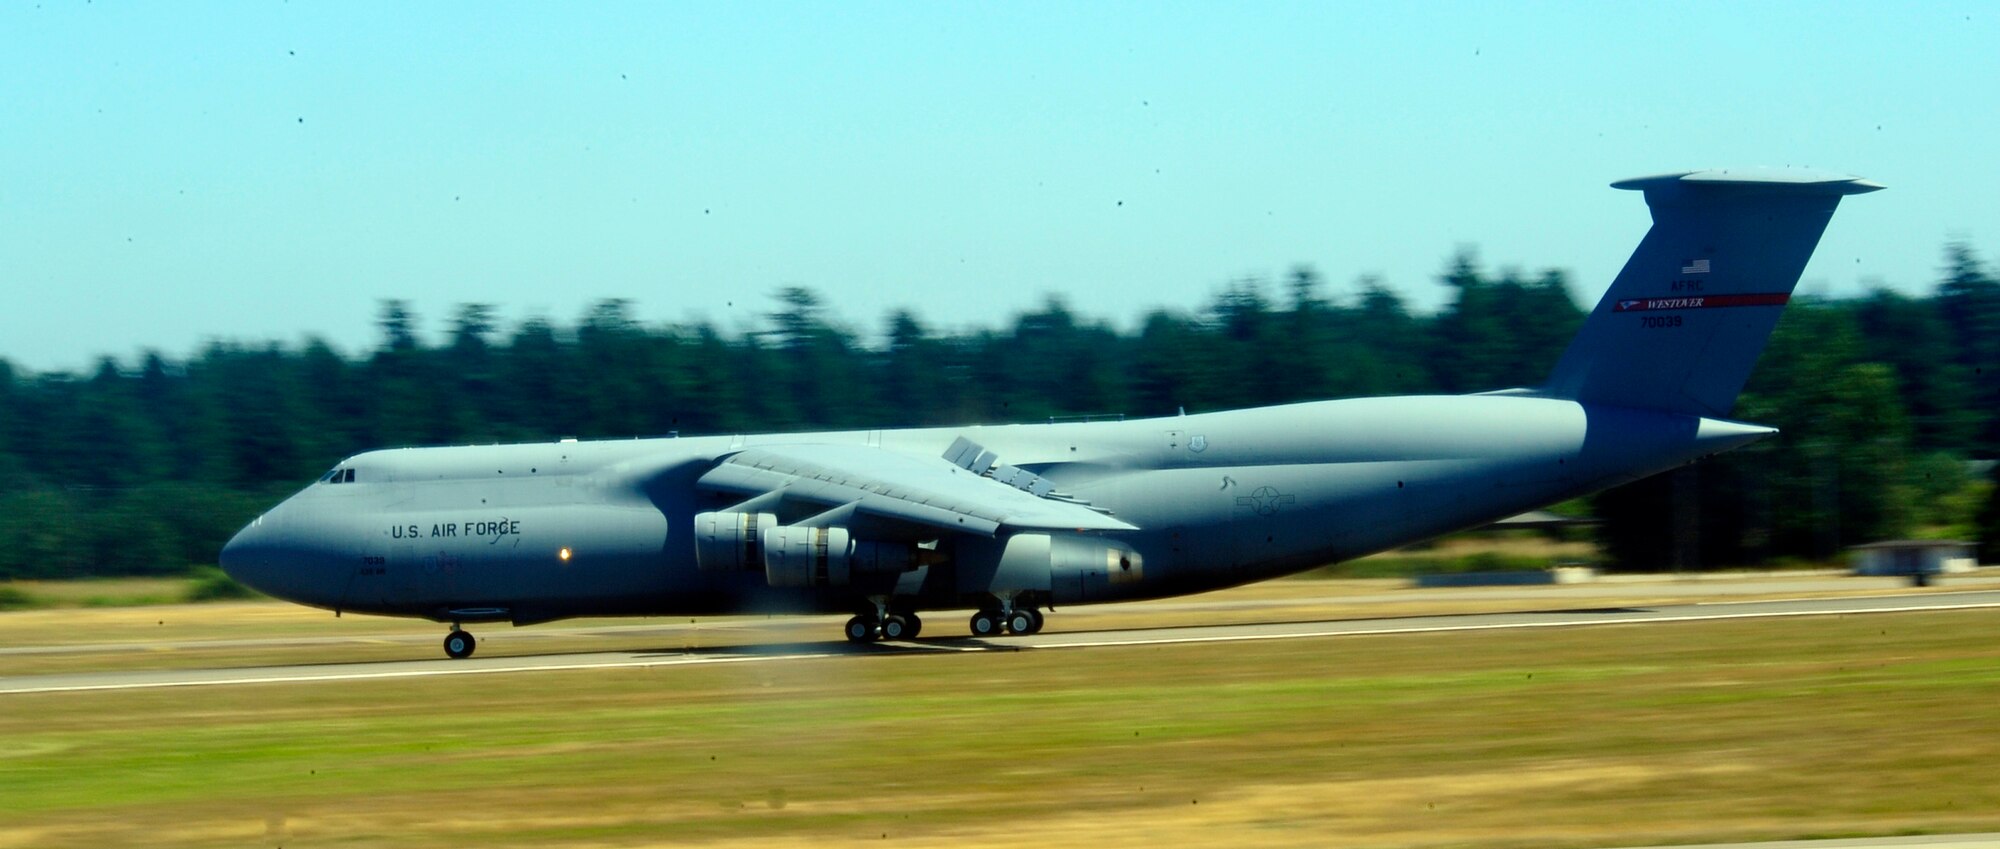 A C-5 Galaxy from the 439th Airlift Wing lands at Joint Base Lewis-McChord, Wash., July 23, 2011, to partcipate in Air Mobility Rodeo 2011. Rodeo is a biennial international competition that focuses on mission readiness, featuring airdrops, aerial refueling and other events that showcase the skills of mobility crews from around the world. The 439th AW hails from  Westover Air Reserve Base, Mass. (U.S. Air Force photo/Staff Sgt. J.G. Buzanowski)